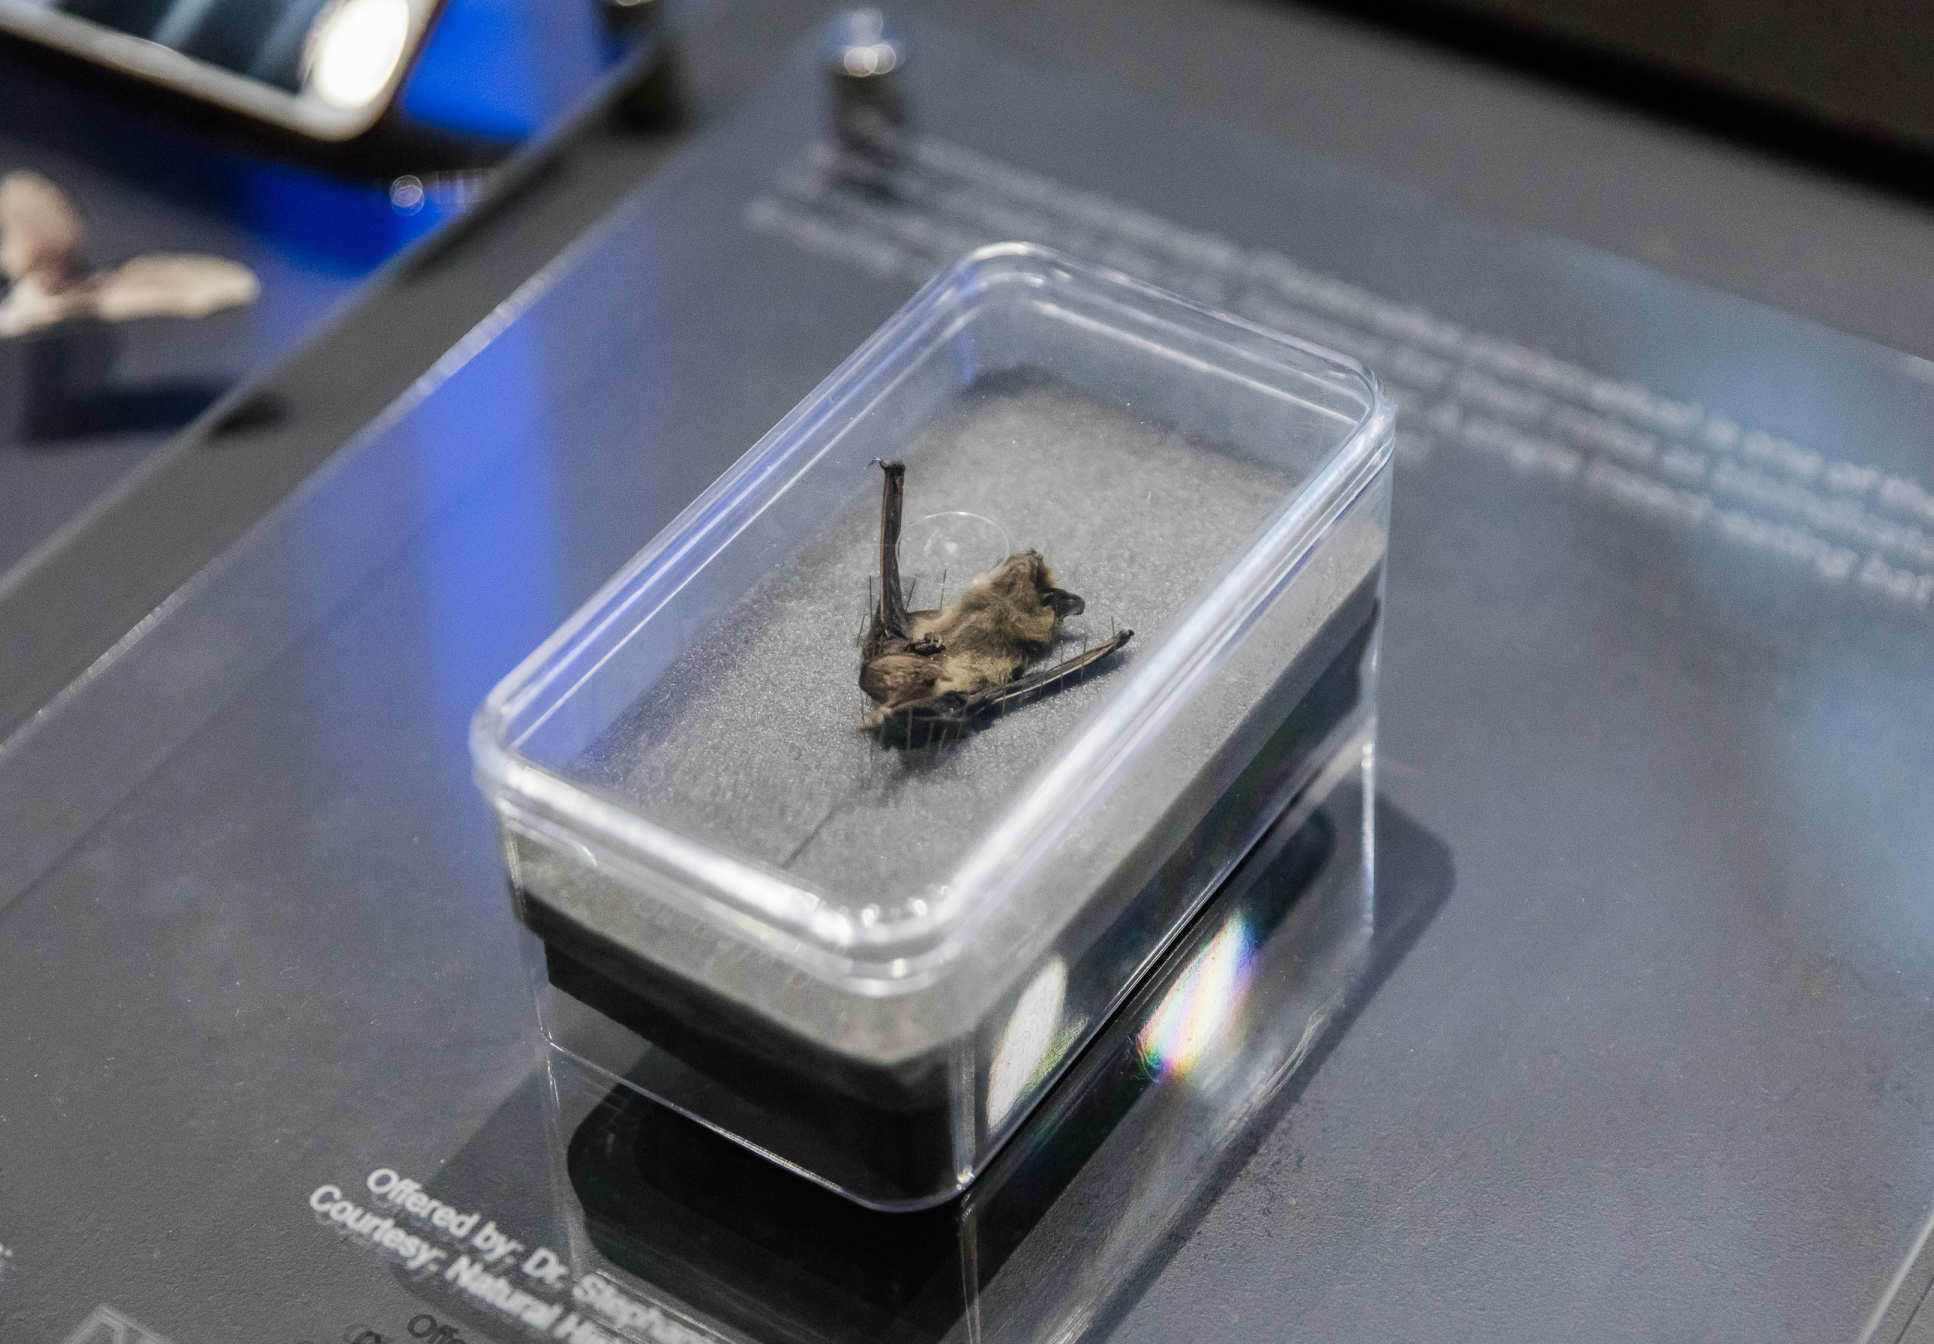 A bat in a box as part of Nocturn's exhibit